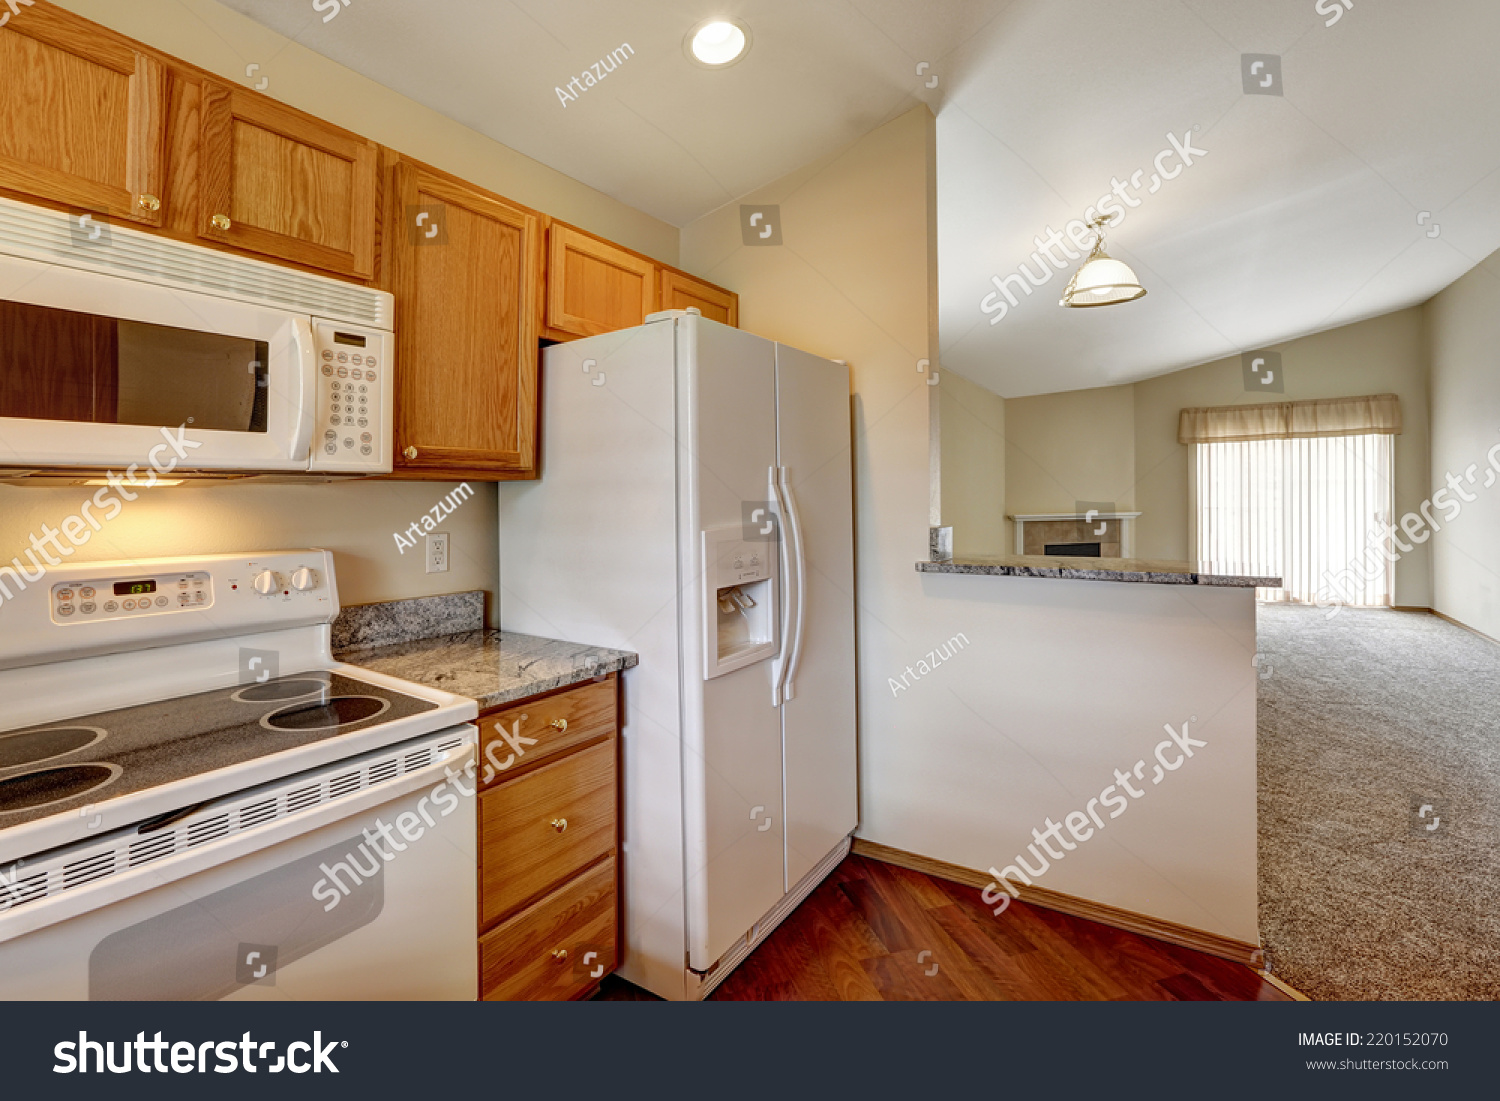 Kitchen area in empty house. White appliances and wooden cabinet. #220152070